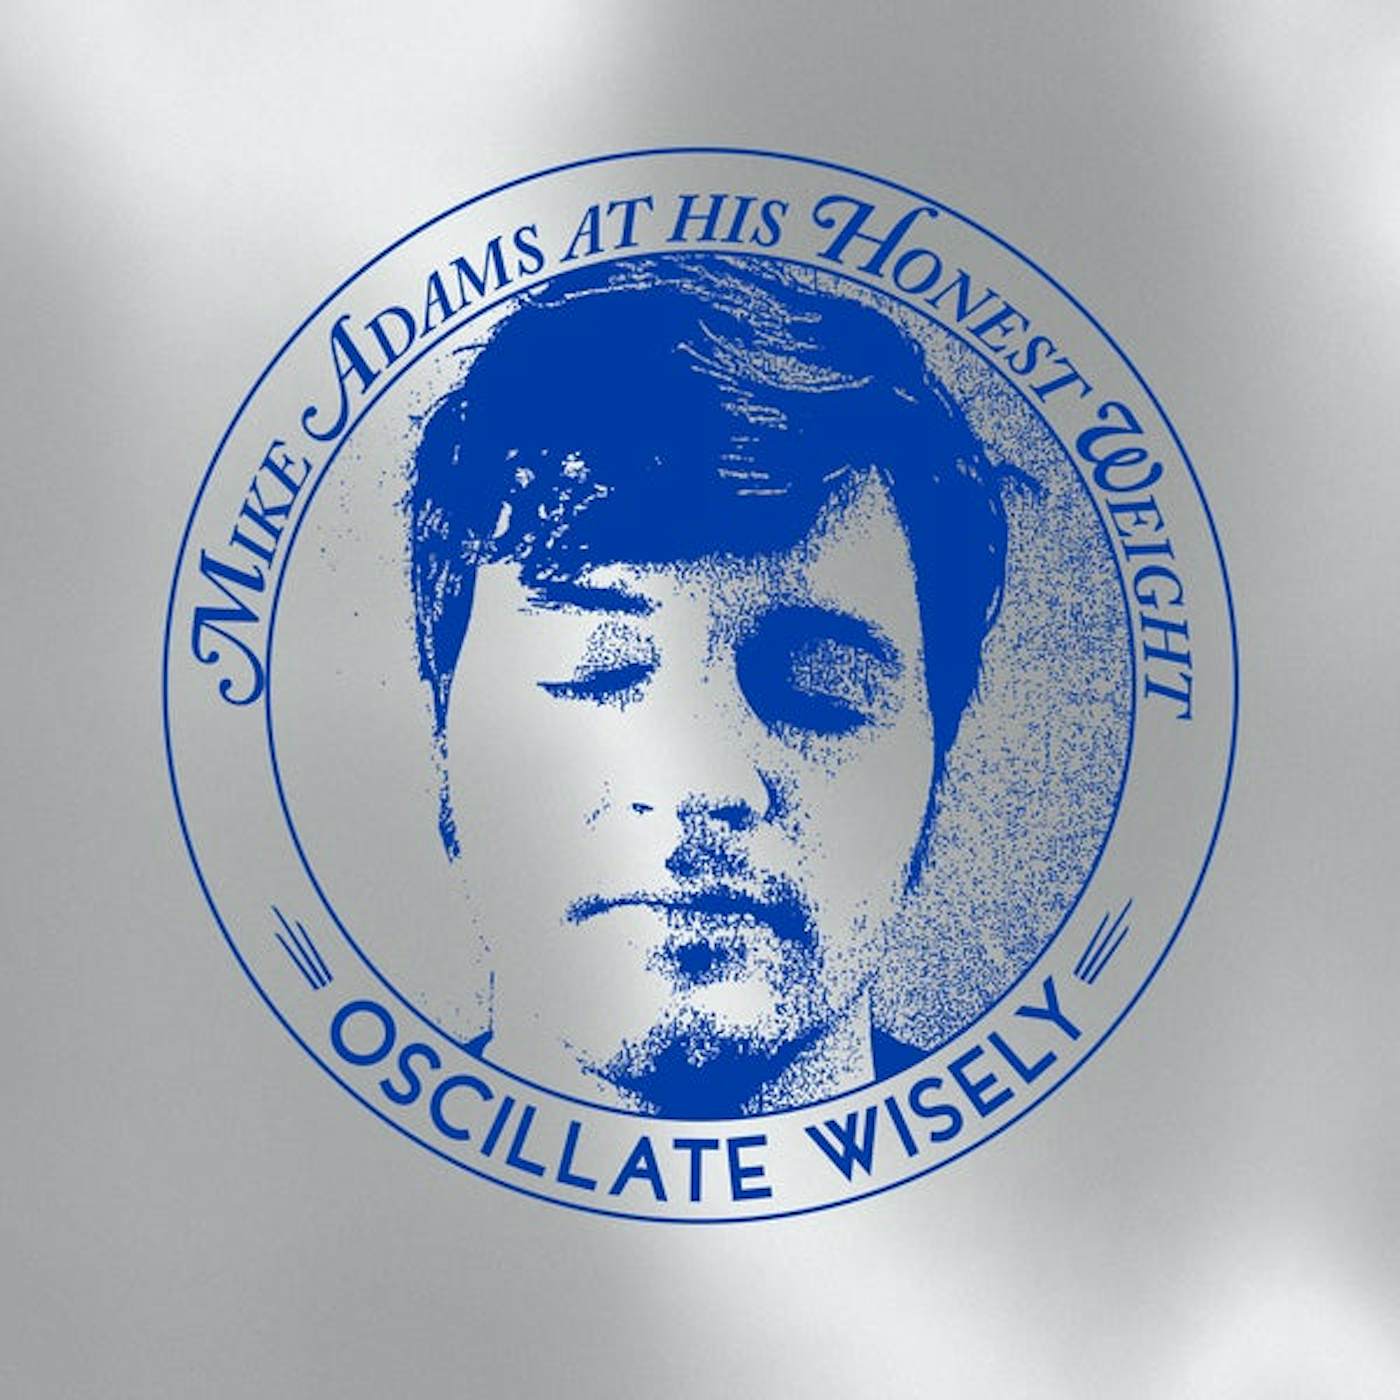 Mike Adams at His Honest Weight Oscillate Wisely: (10TH ANNIV. ED.) (SILVER) Vinyl Record